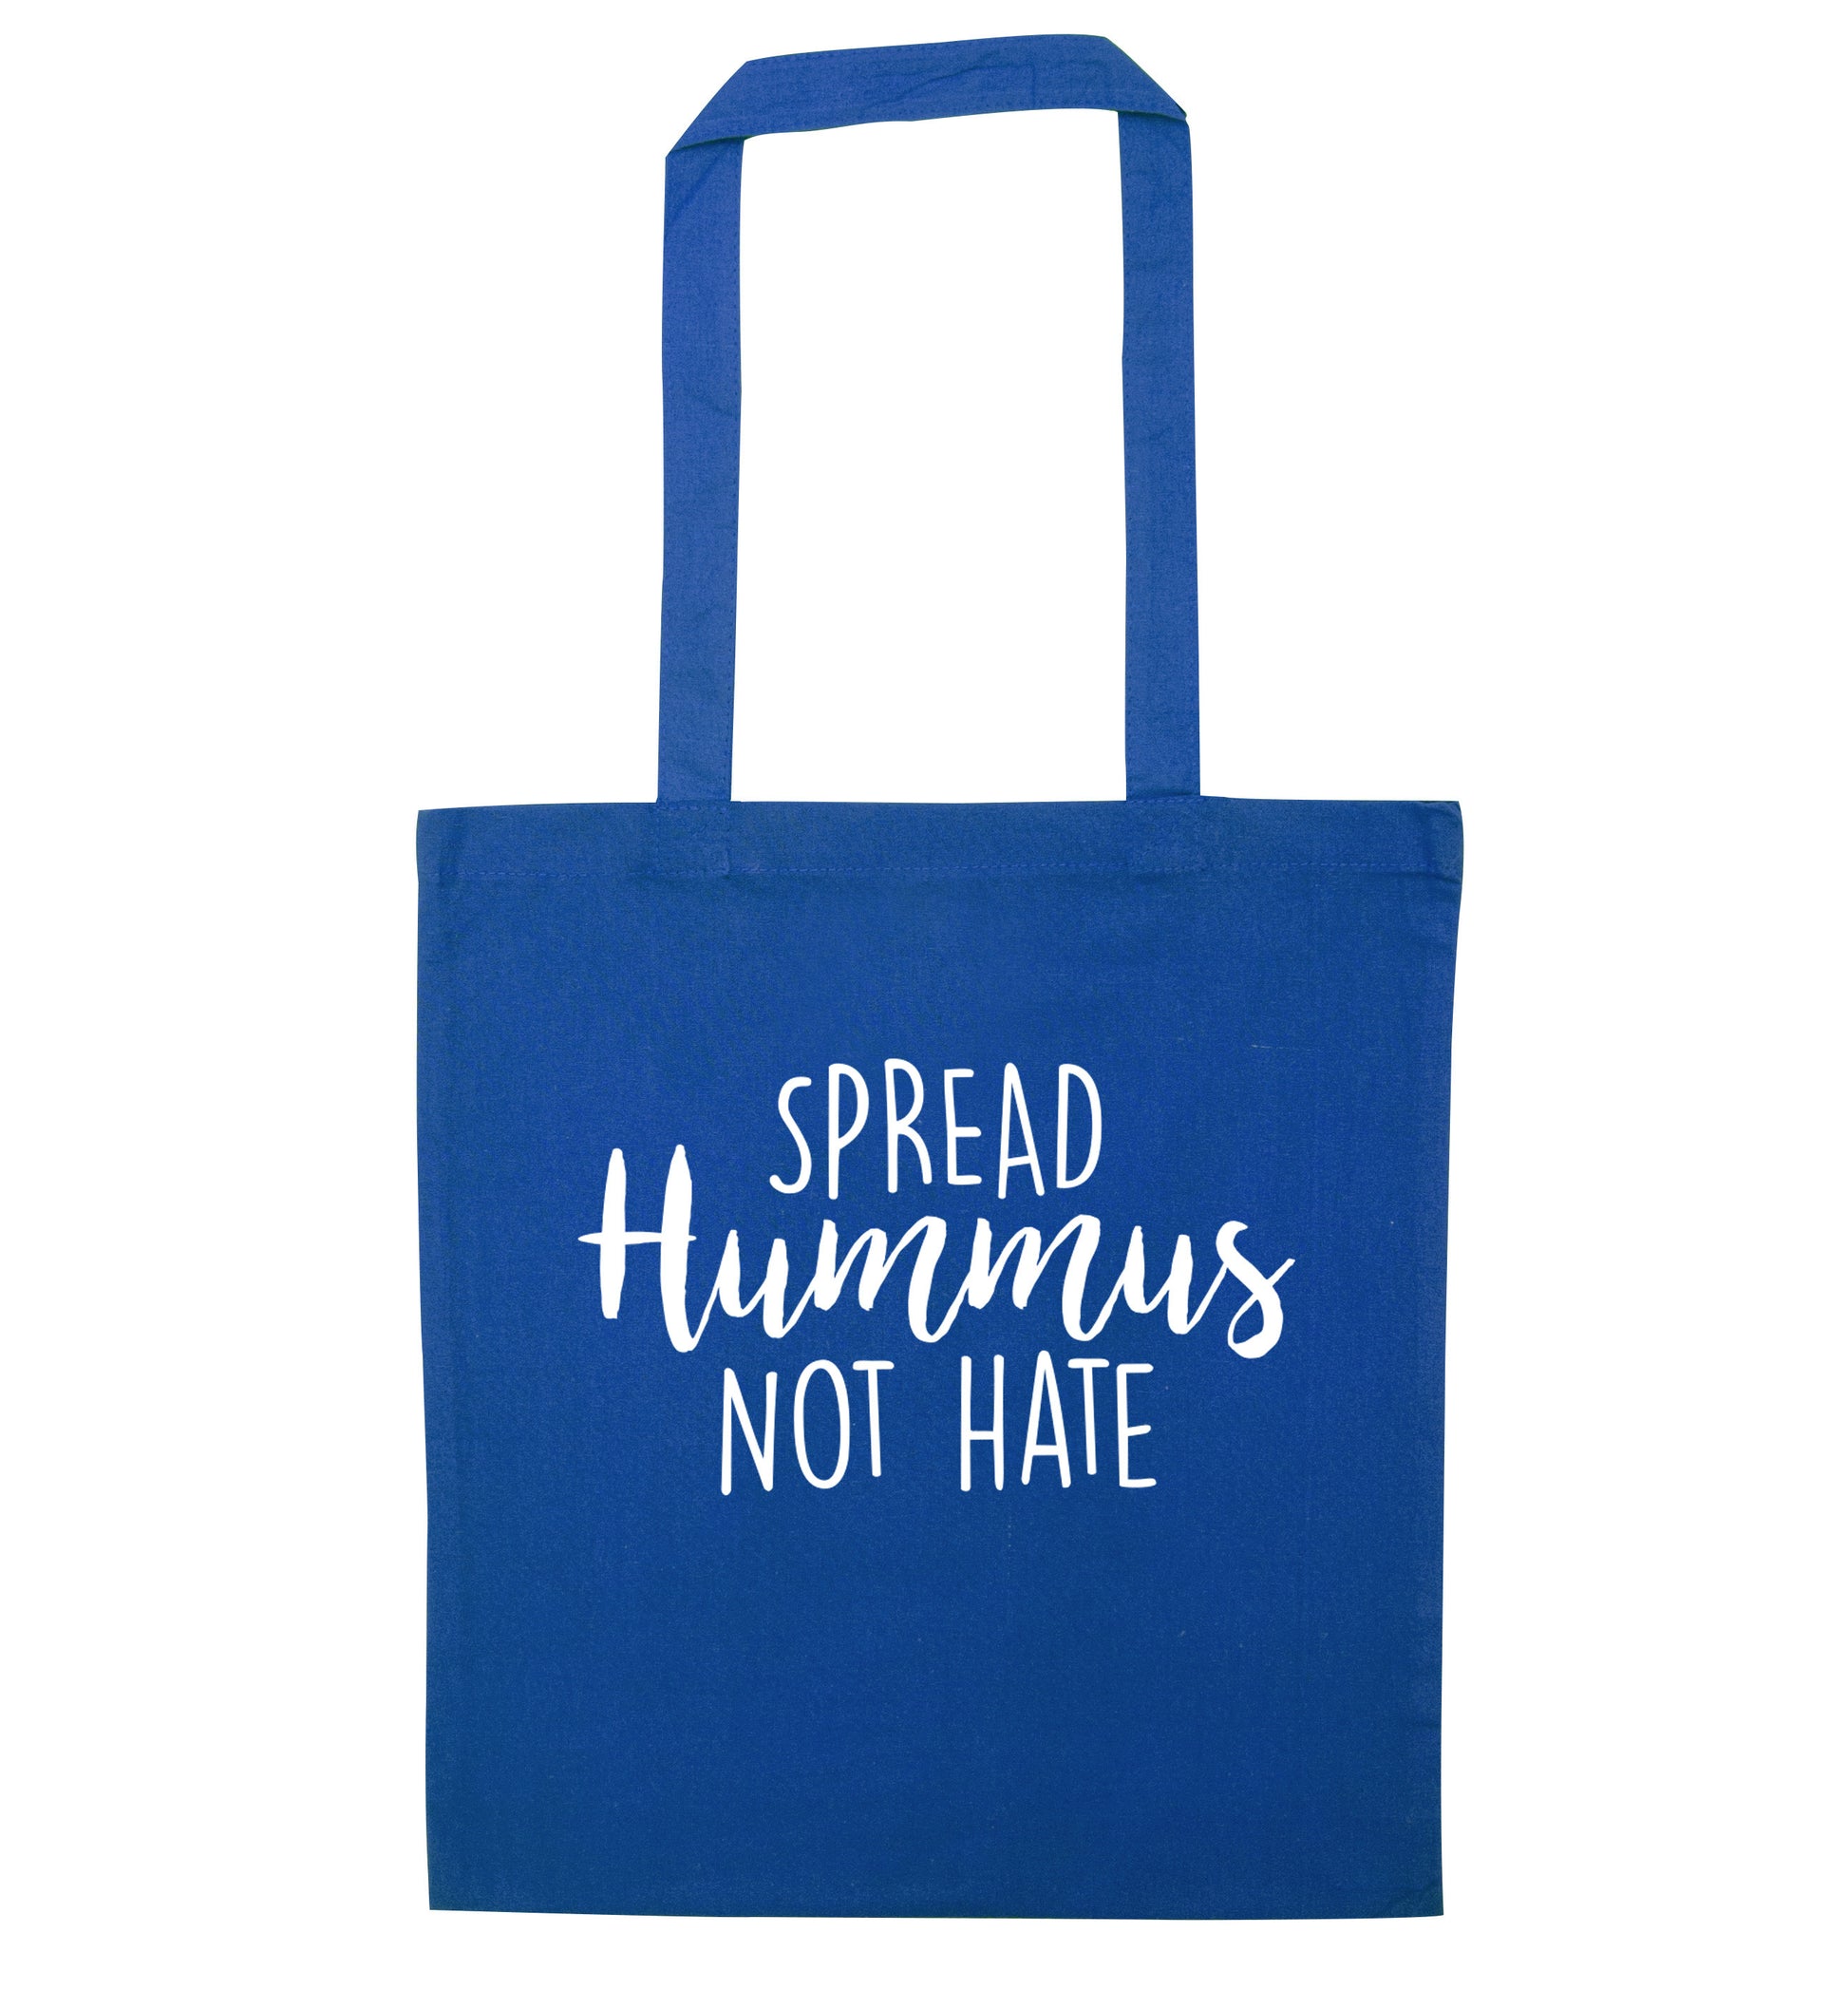 Spread hummus not hate script text blue tote bag